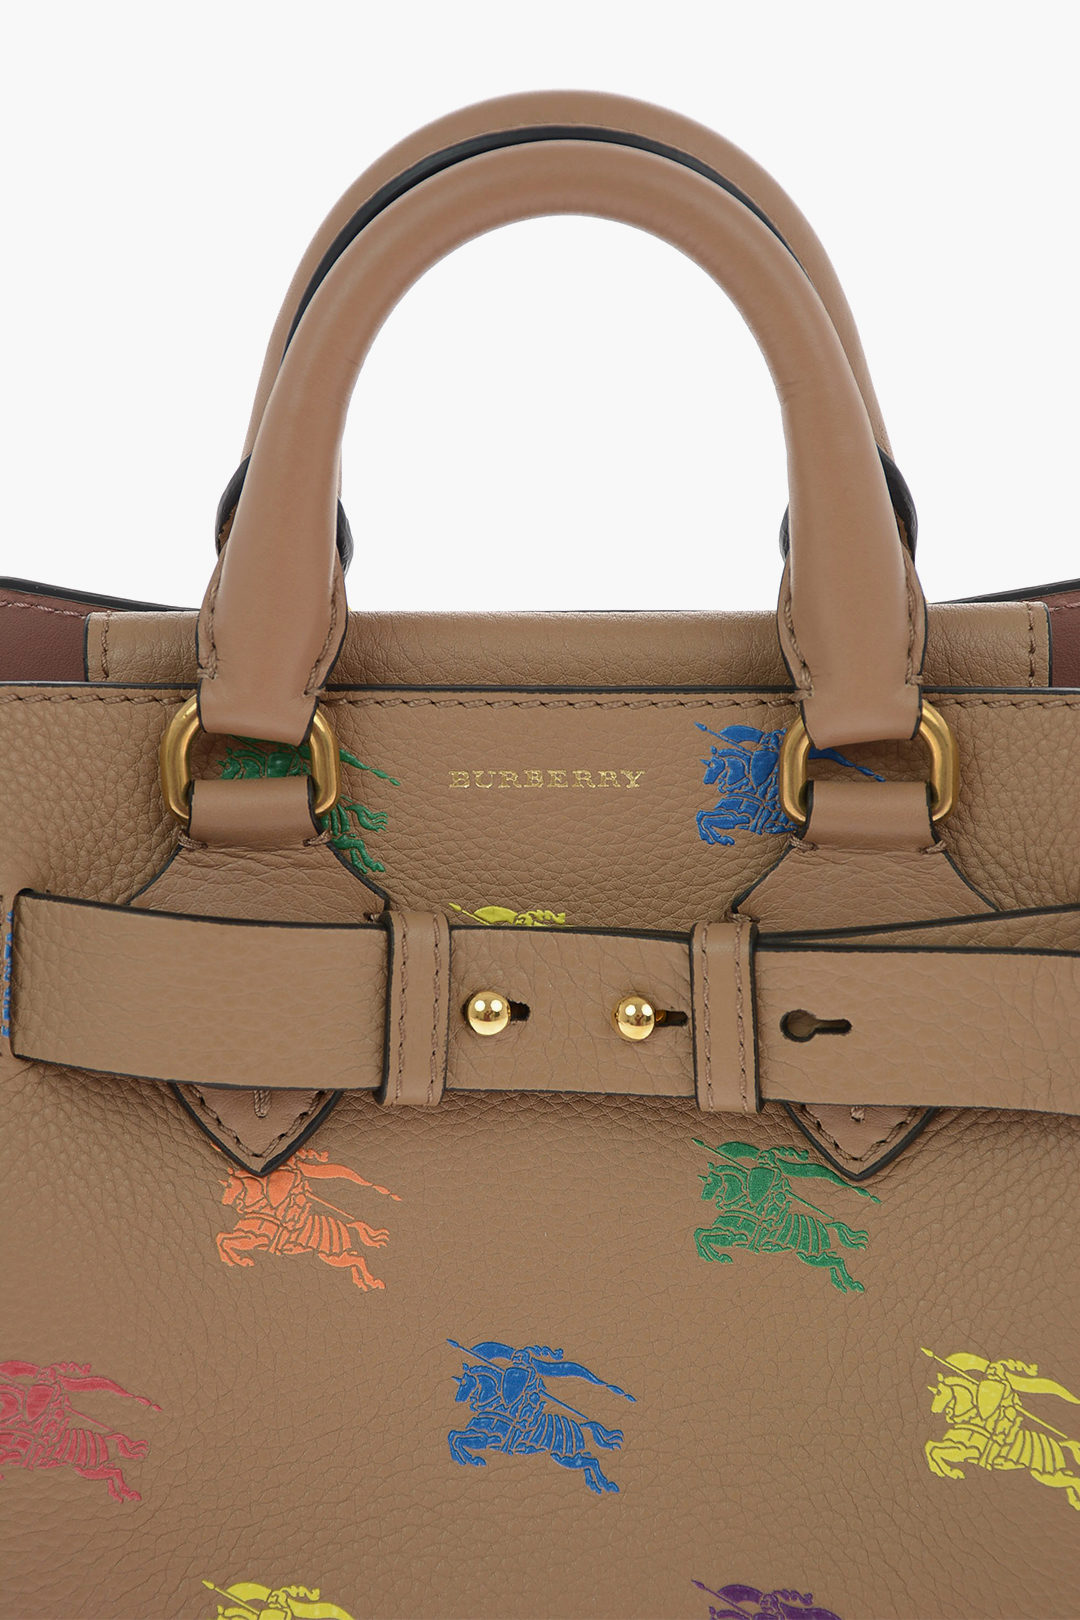 Burberry Horse Rainbow Baby Belt Printed Leather Tote Bag Camel